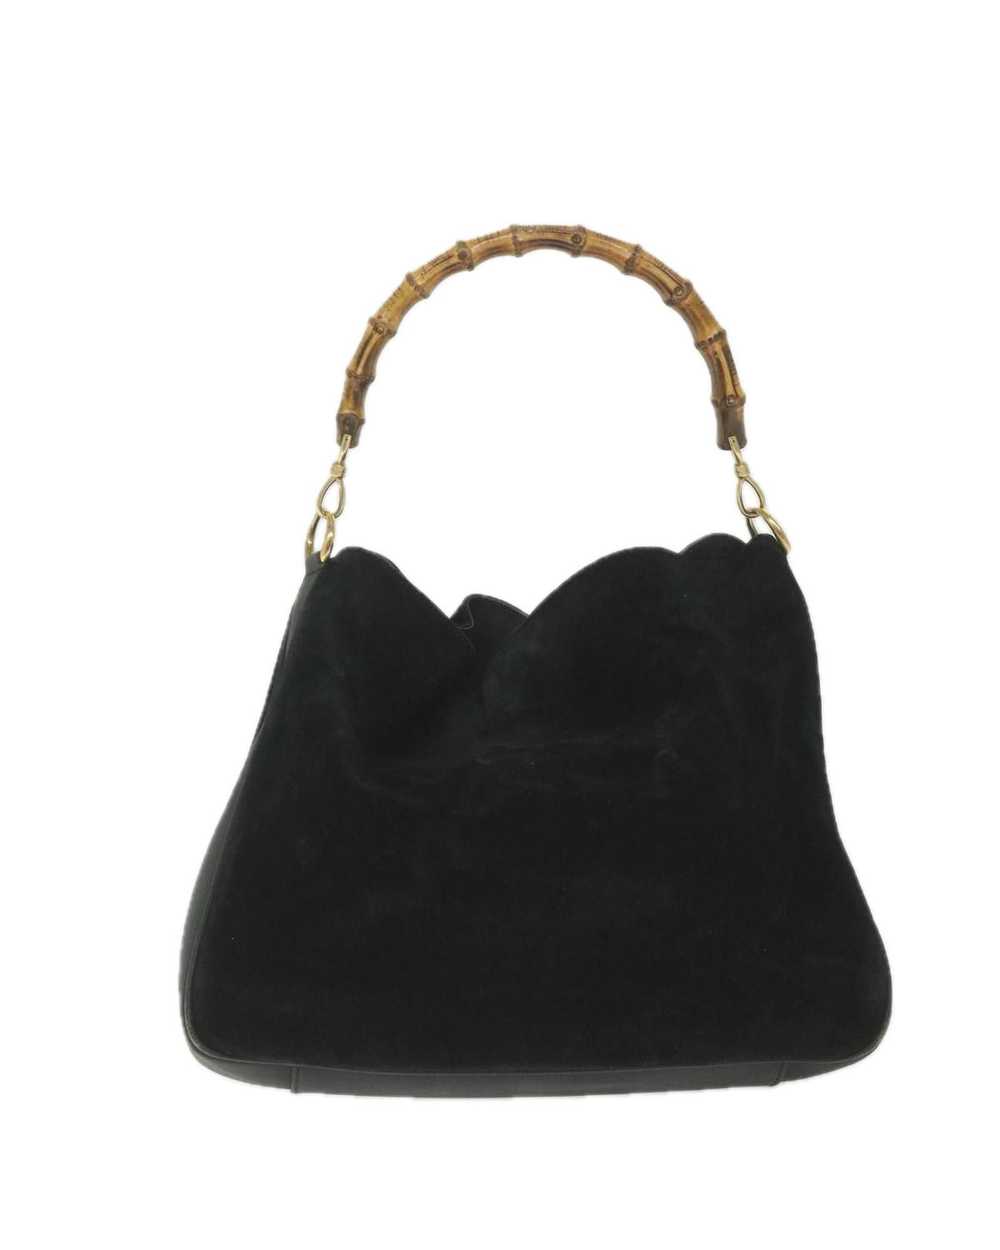 Gucci Black Suede Shoulder Bag with Bamboo Handle - image 2